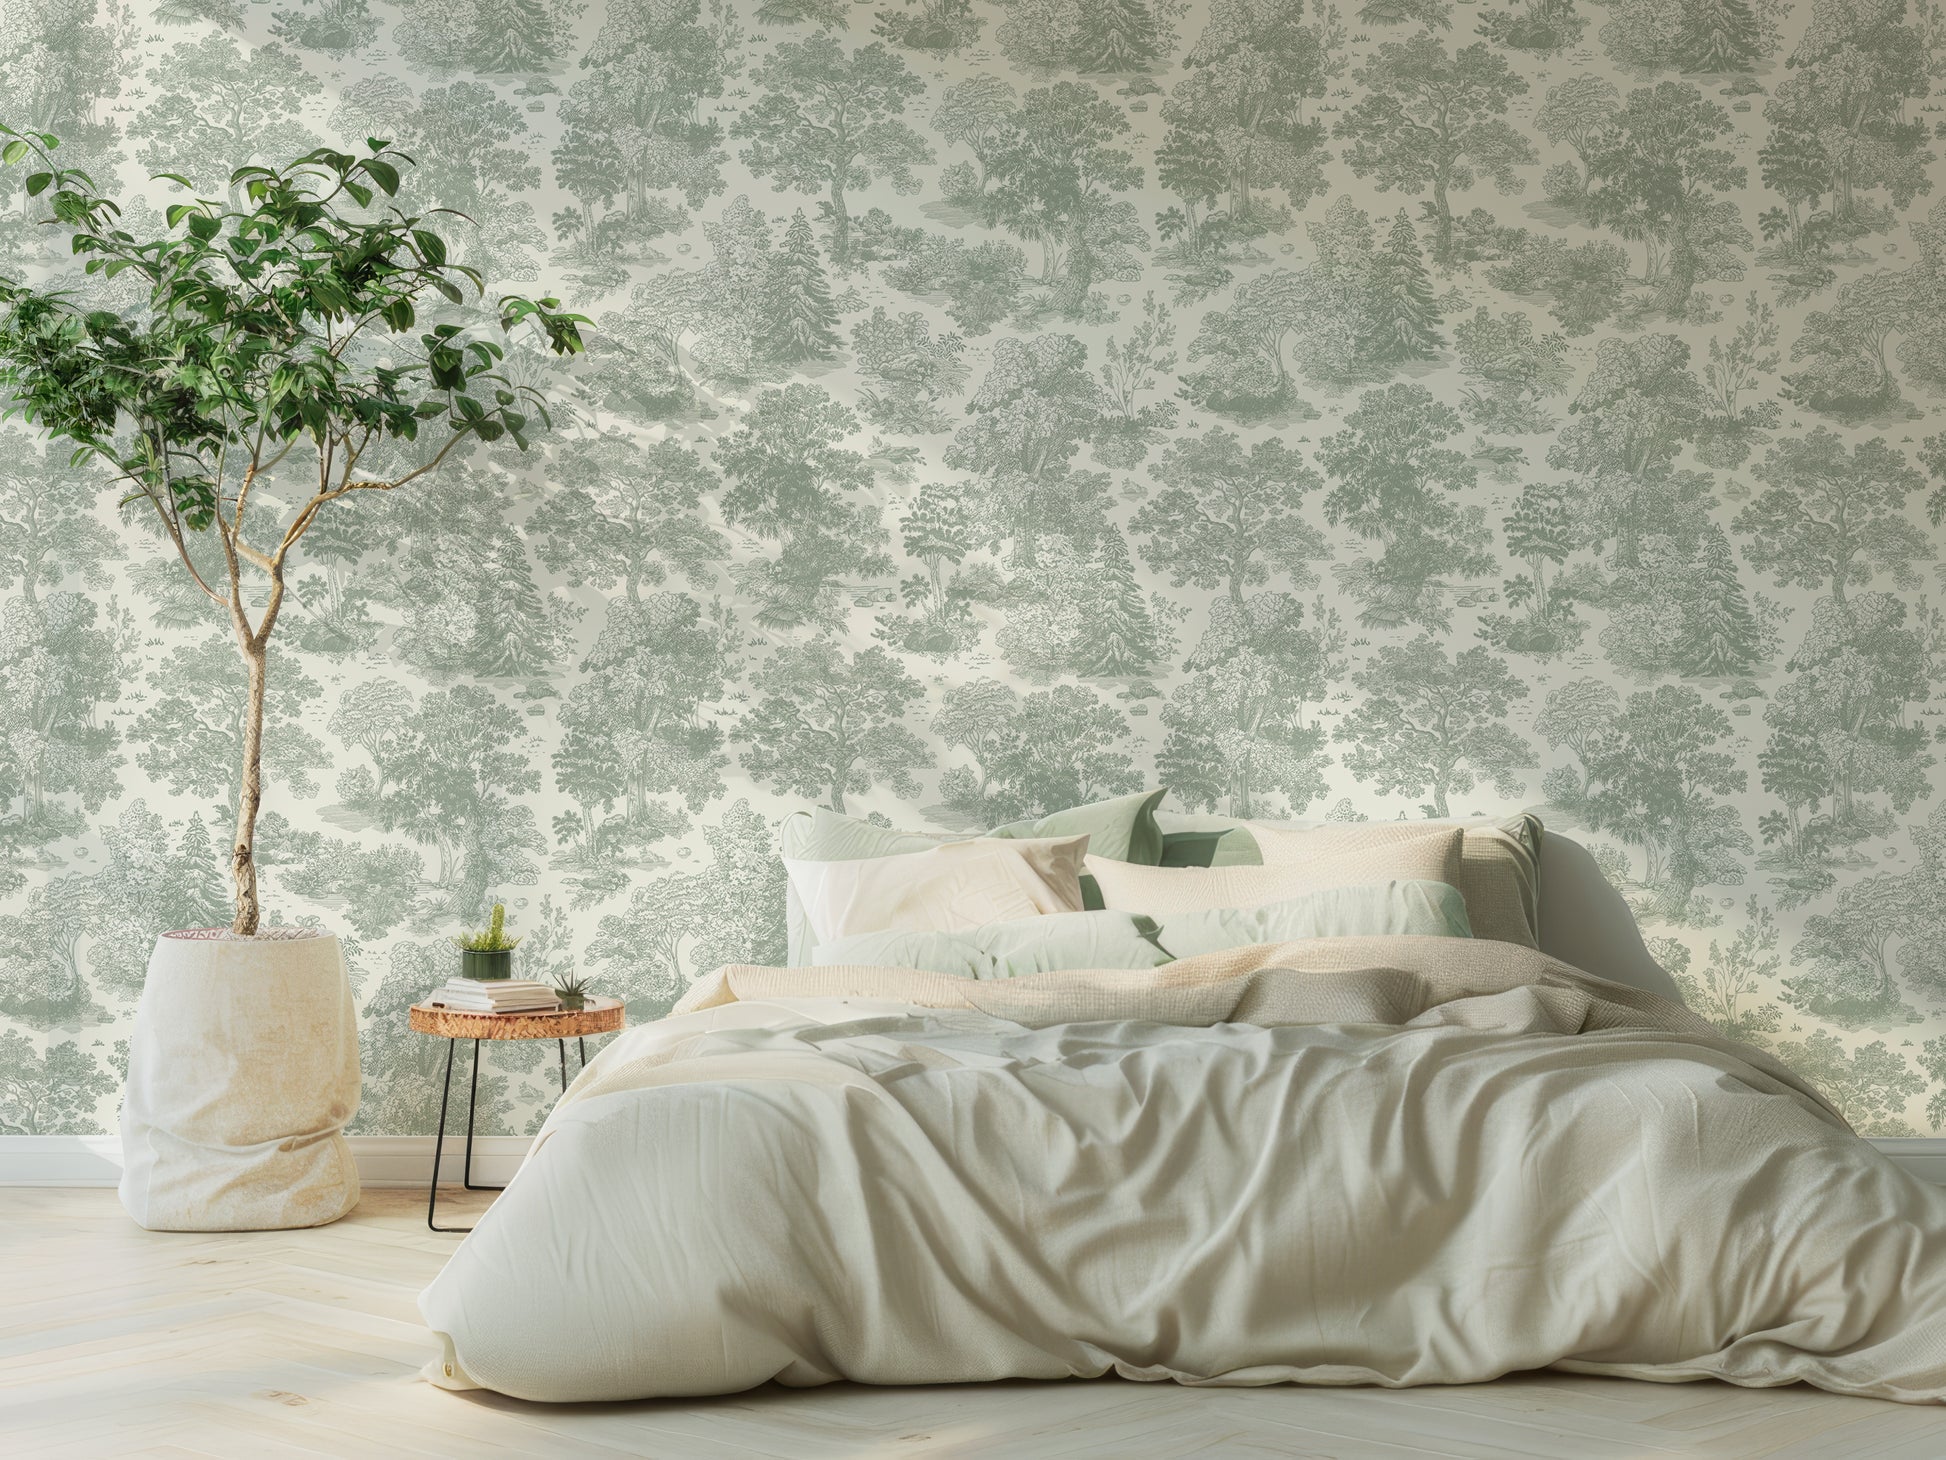 Willow Wallpaper In Bedroom With Sage Green Bed And Small Green Tree In White Pot Next To It